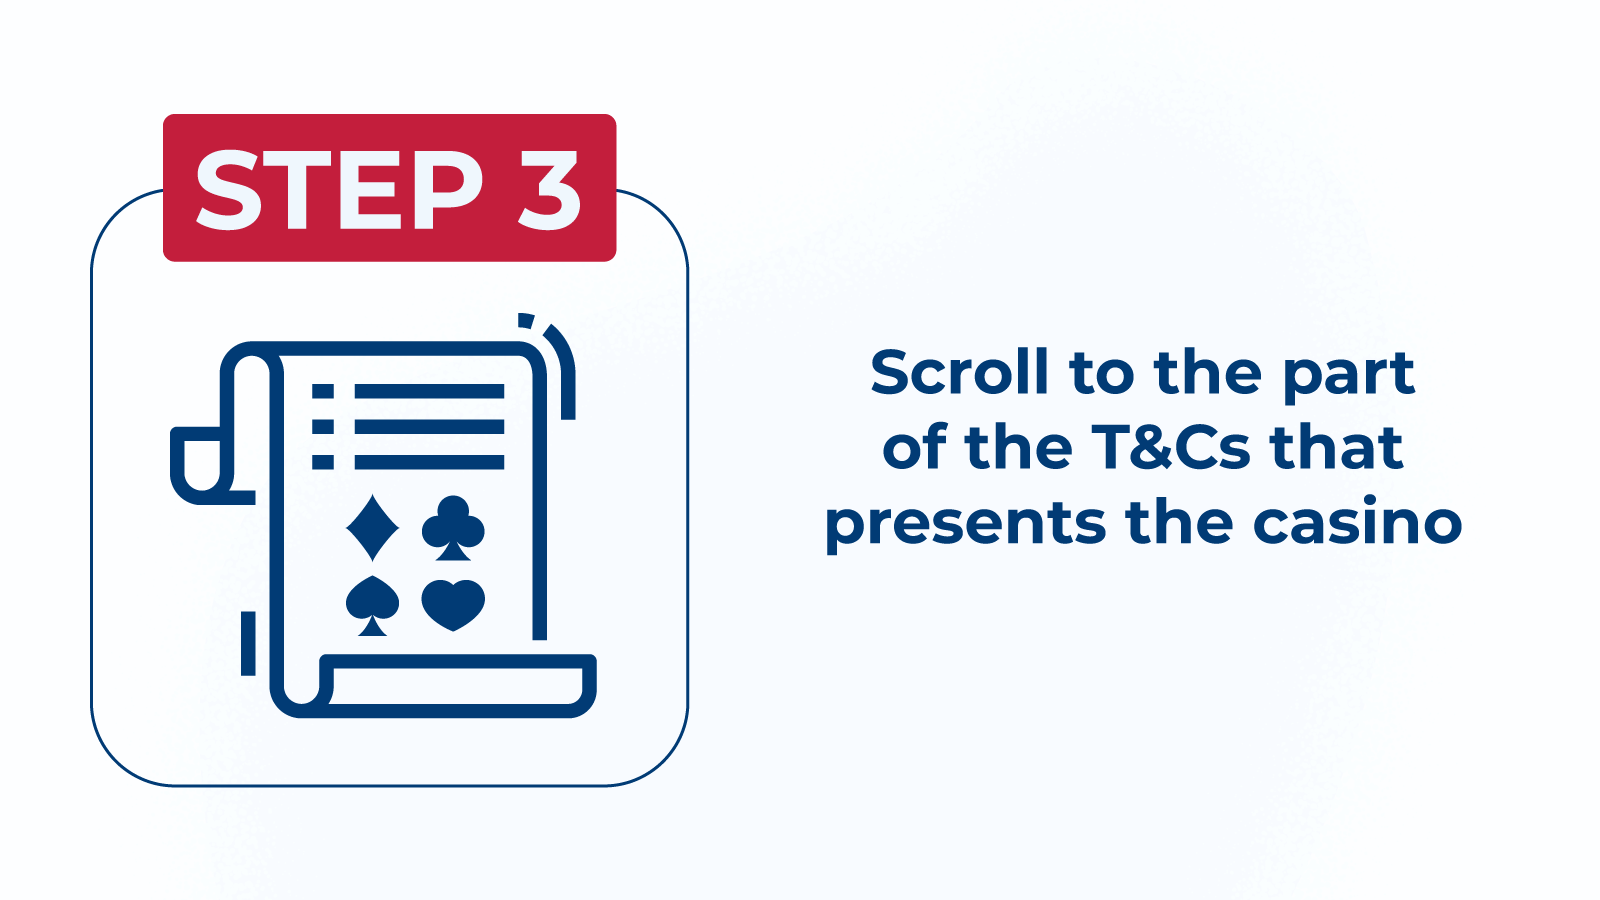 Step 3 Scroll to the part of the T&Cs that presents the casino